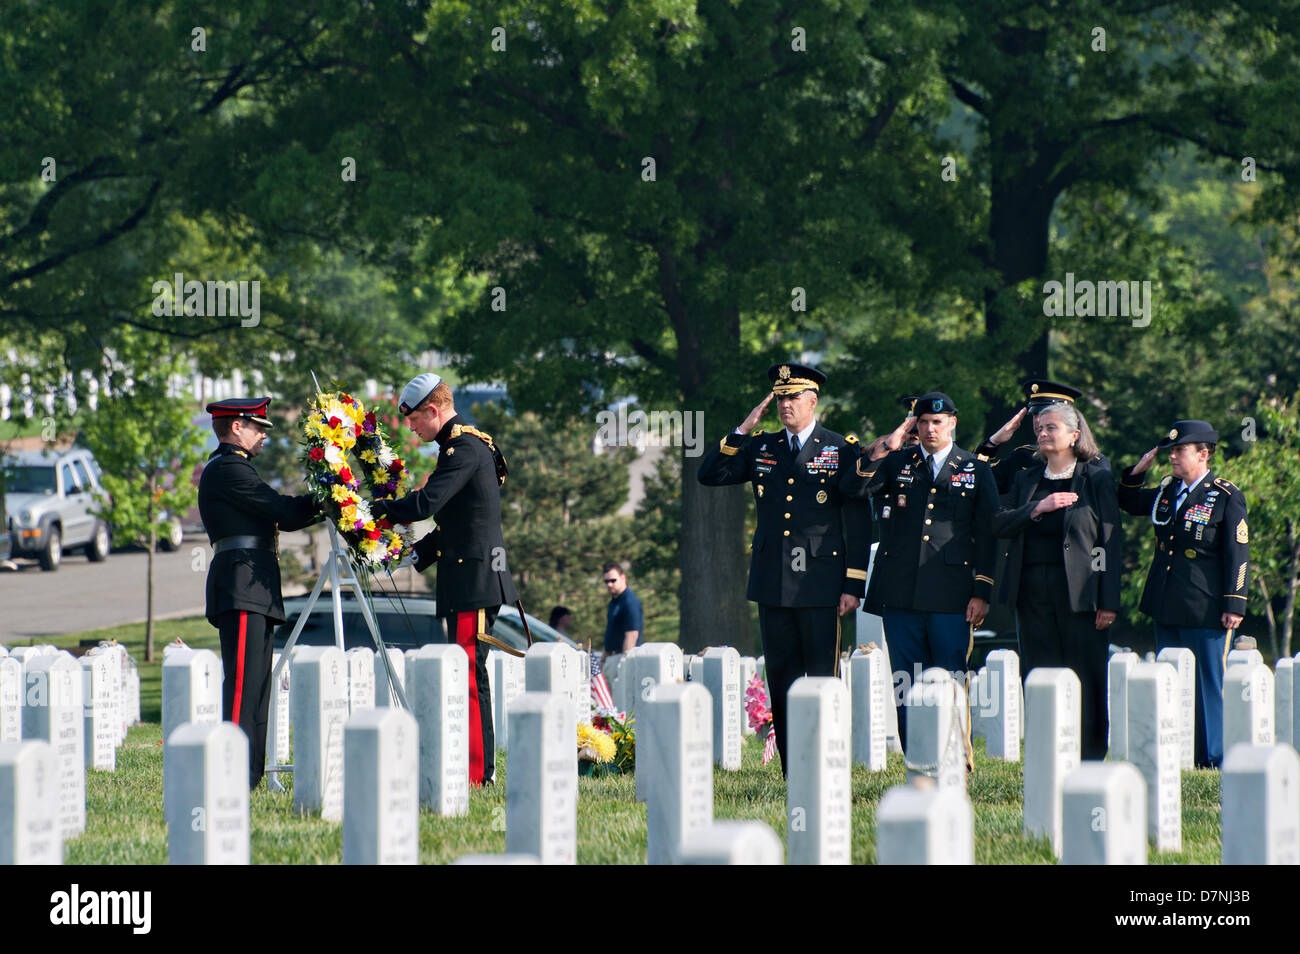 HRH Prince Harry of Wales and US Army Maj. Gen. Michael Linnington pay respect to Section 60 of Arlington National Cemetery May 10, 2013 in Arlington, VA. Section 60 is the burial grounds for US service members killed in the global war on terror since 2001. Stock Photo